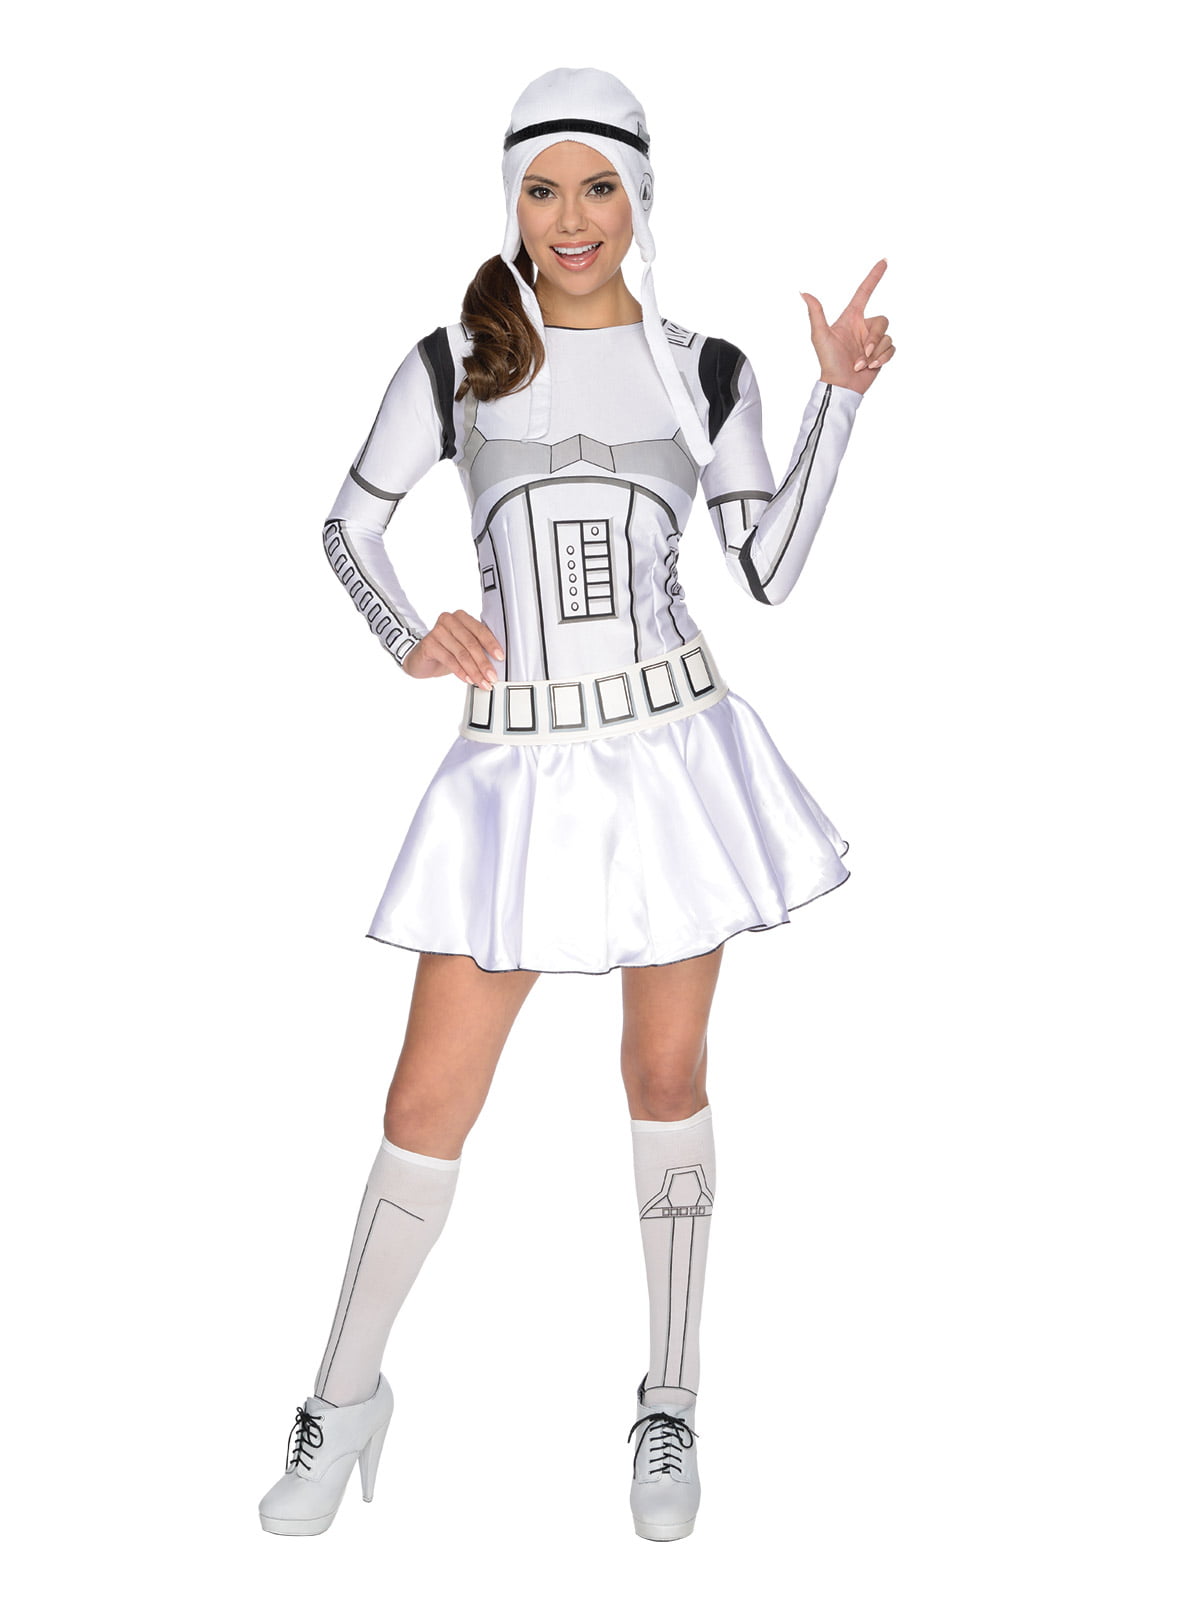 Featured image for “Storm Trooper Female Costume – Adult”